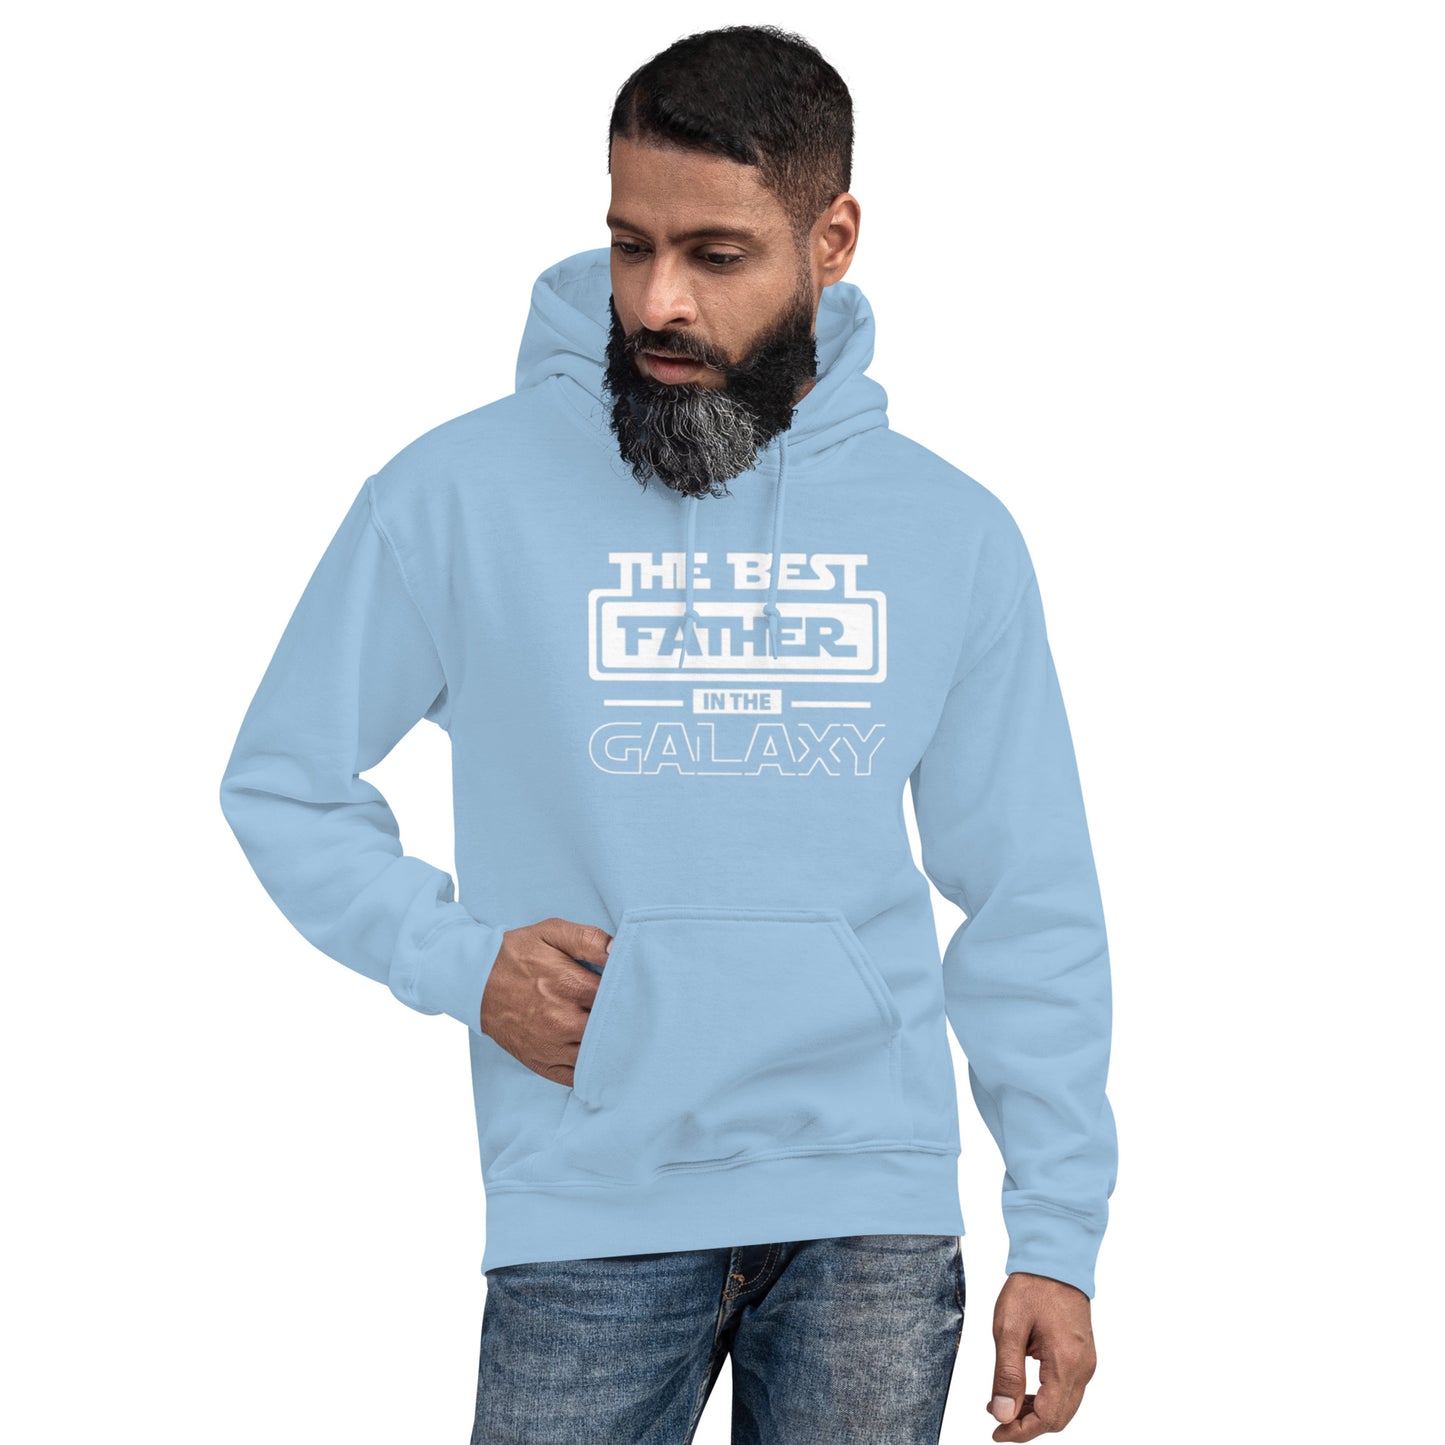 Best Father in the Galaxy Unisex Hoodie